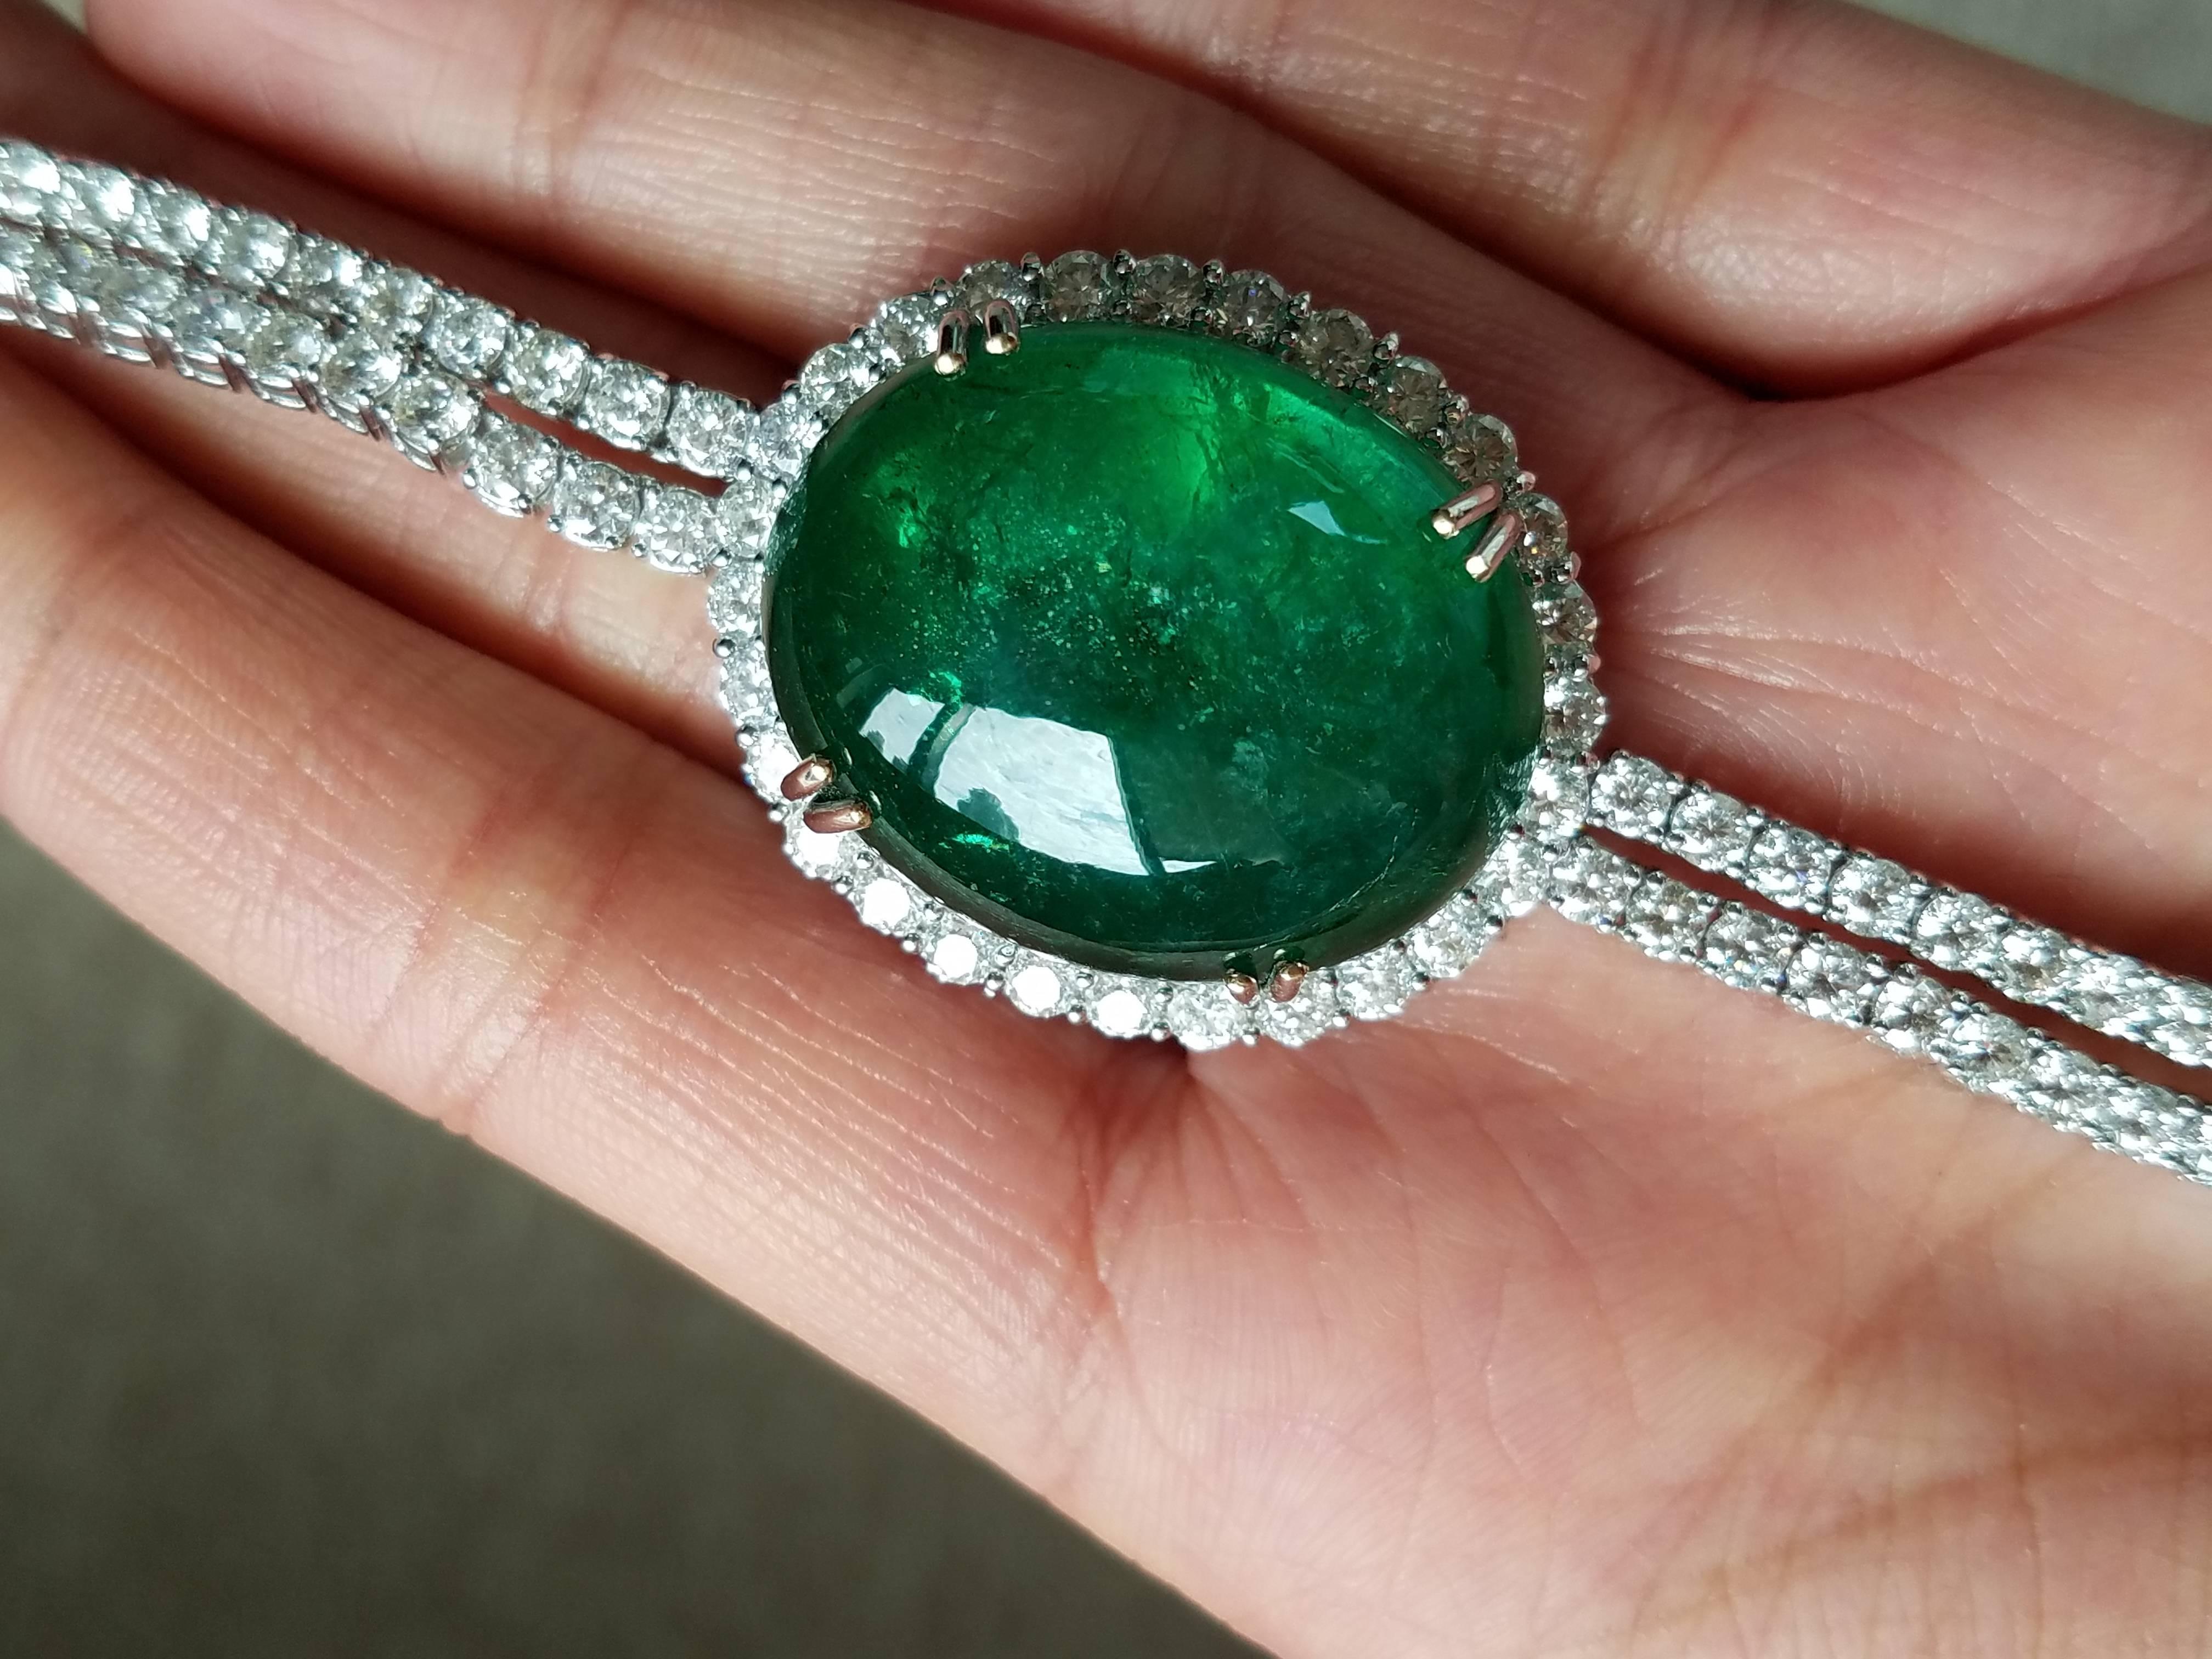 Magnificent emerald and diamond suite of jewellery, comprising a necklace, ring and earrings. A very elegant necklace, earring and ring set - using Emerald Cabochons/Drops and White Diamond, all set in 18K white gold. 

Necklace Details: 57.7 Carats